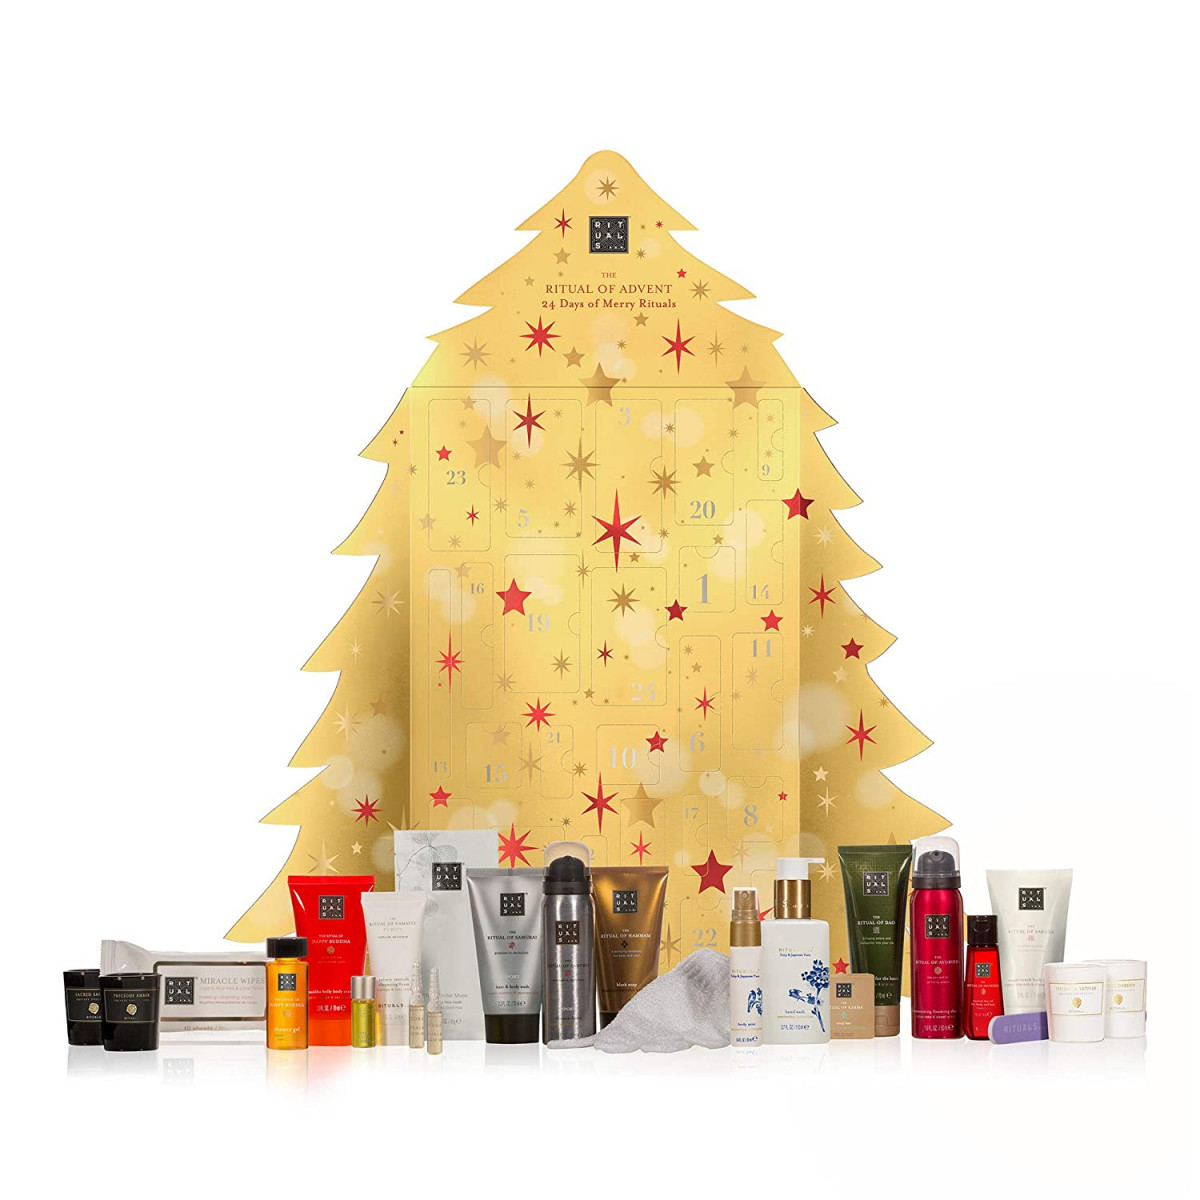 Alea's Deals RITUALS The Ritual of Advent 24 Luxurious Bath, Body and Home Gift Set Up to 54% Off! Was $74.00!  